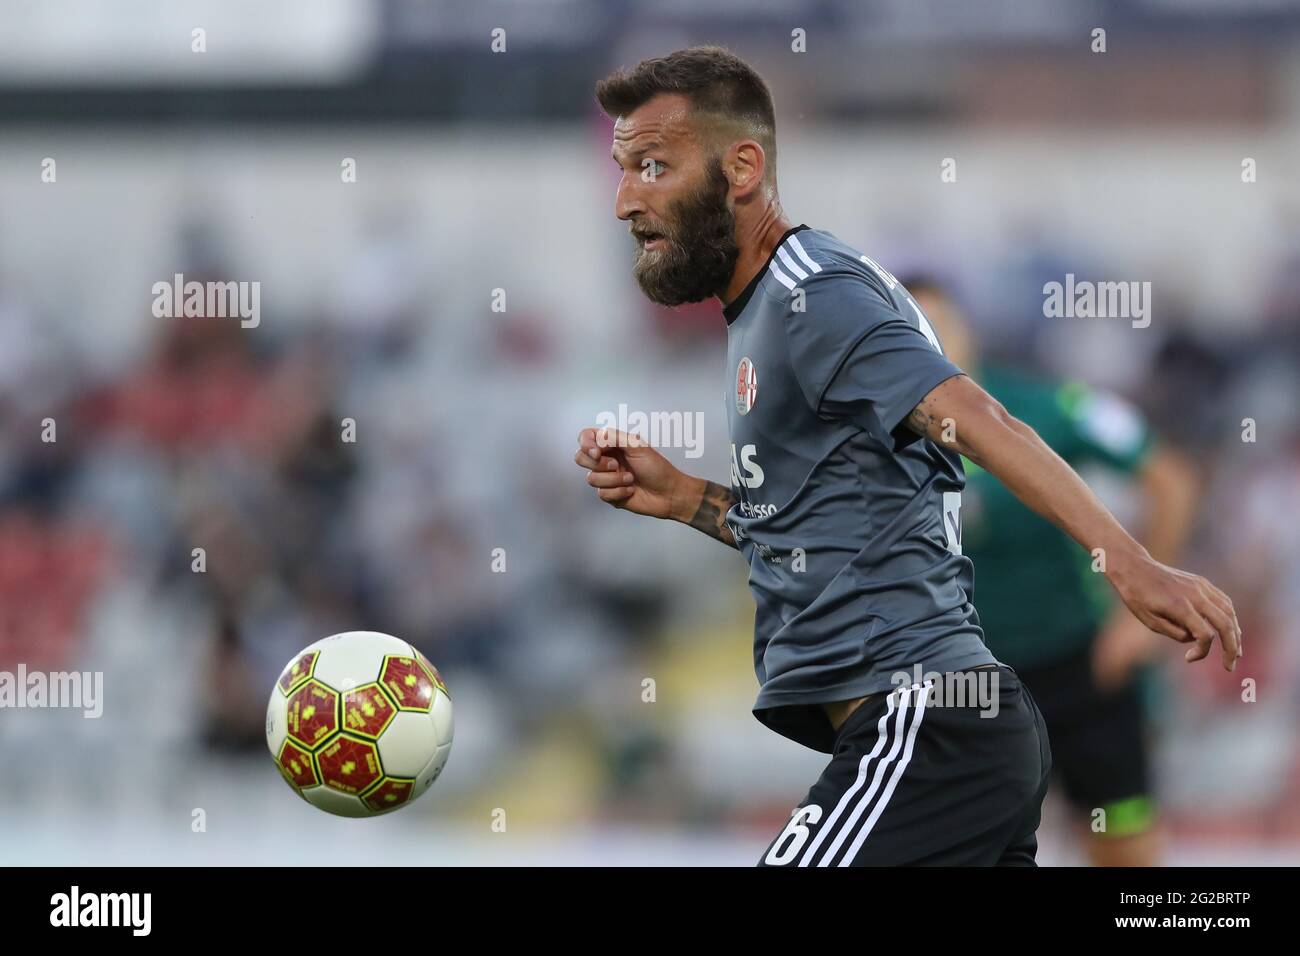 Alessandria, Italy, 9th June 2021. Mirko Bruccini of US Alessandria during the Serie C match at Stadio Giuseppe Moccagatta - Alessandria, Torino. Picture credit should read: Jonathan Moscrop / Sportimage Credit: Sportimage/Alamy Live News Stock Photo